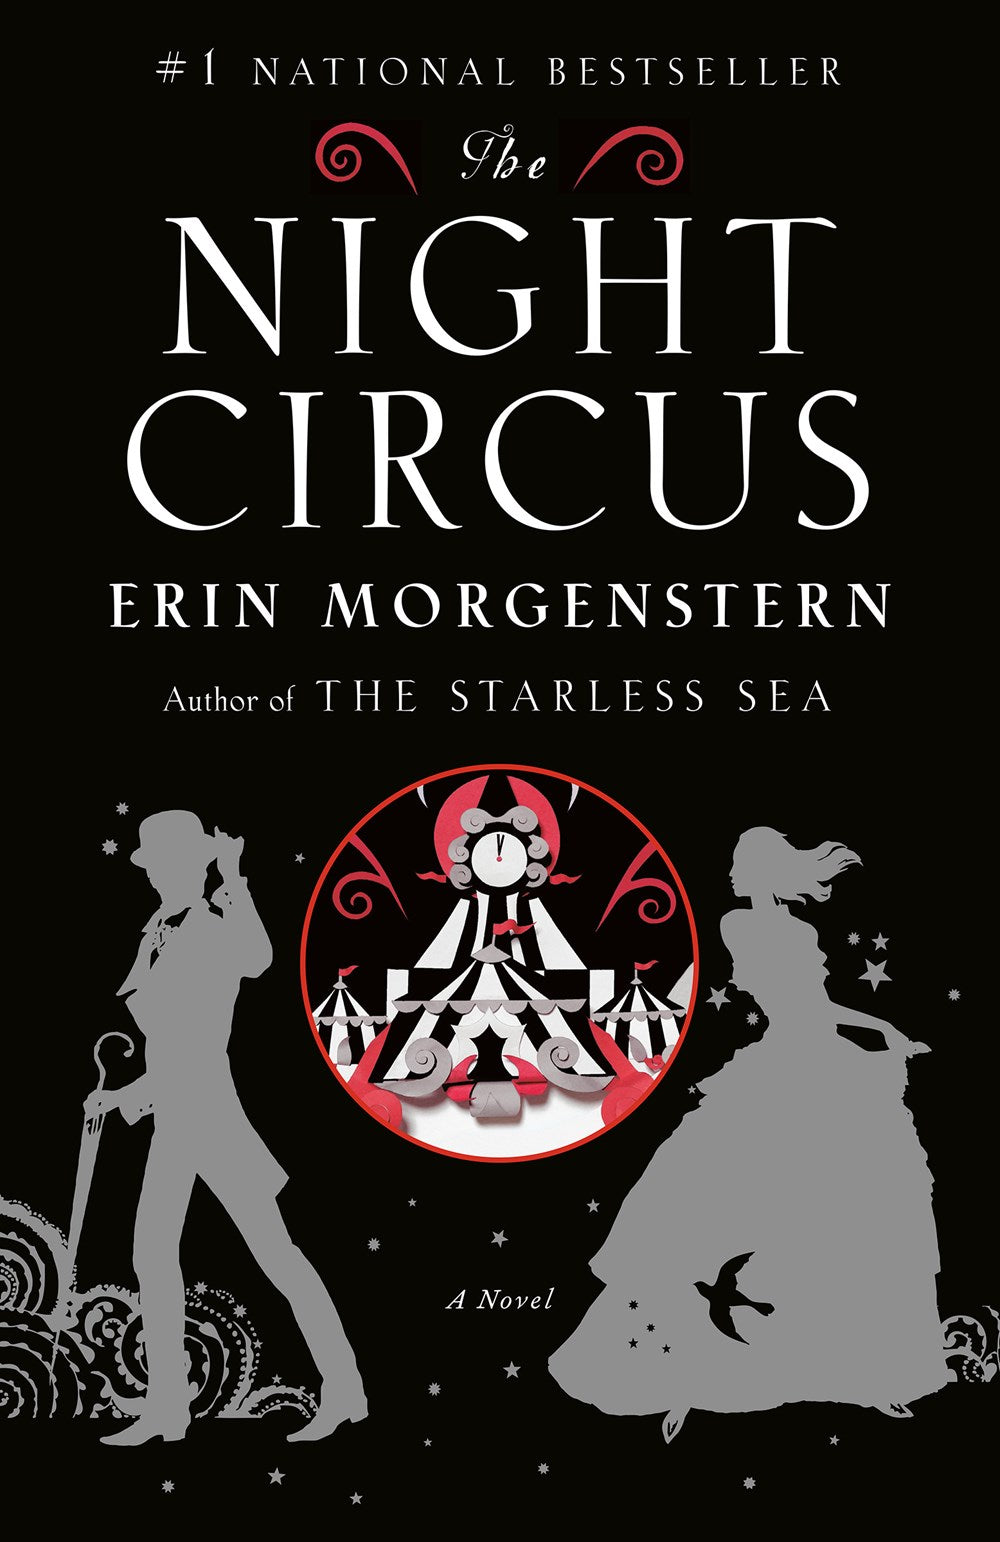 The Night Circus: A Novel by Erin Morgenstern